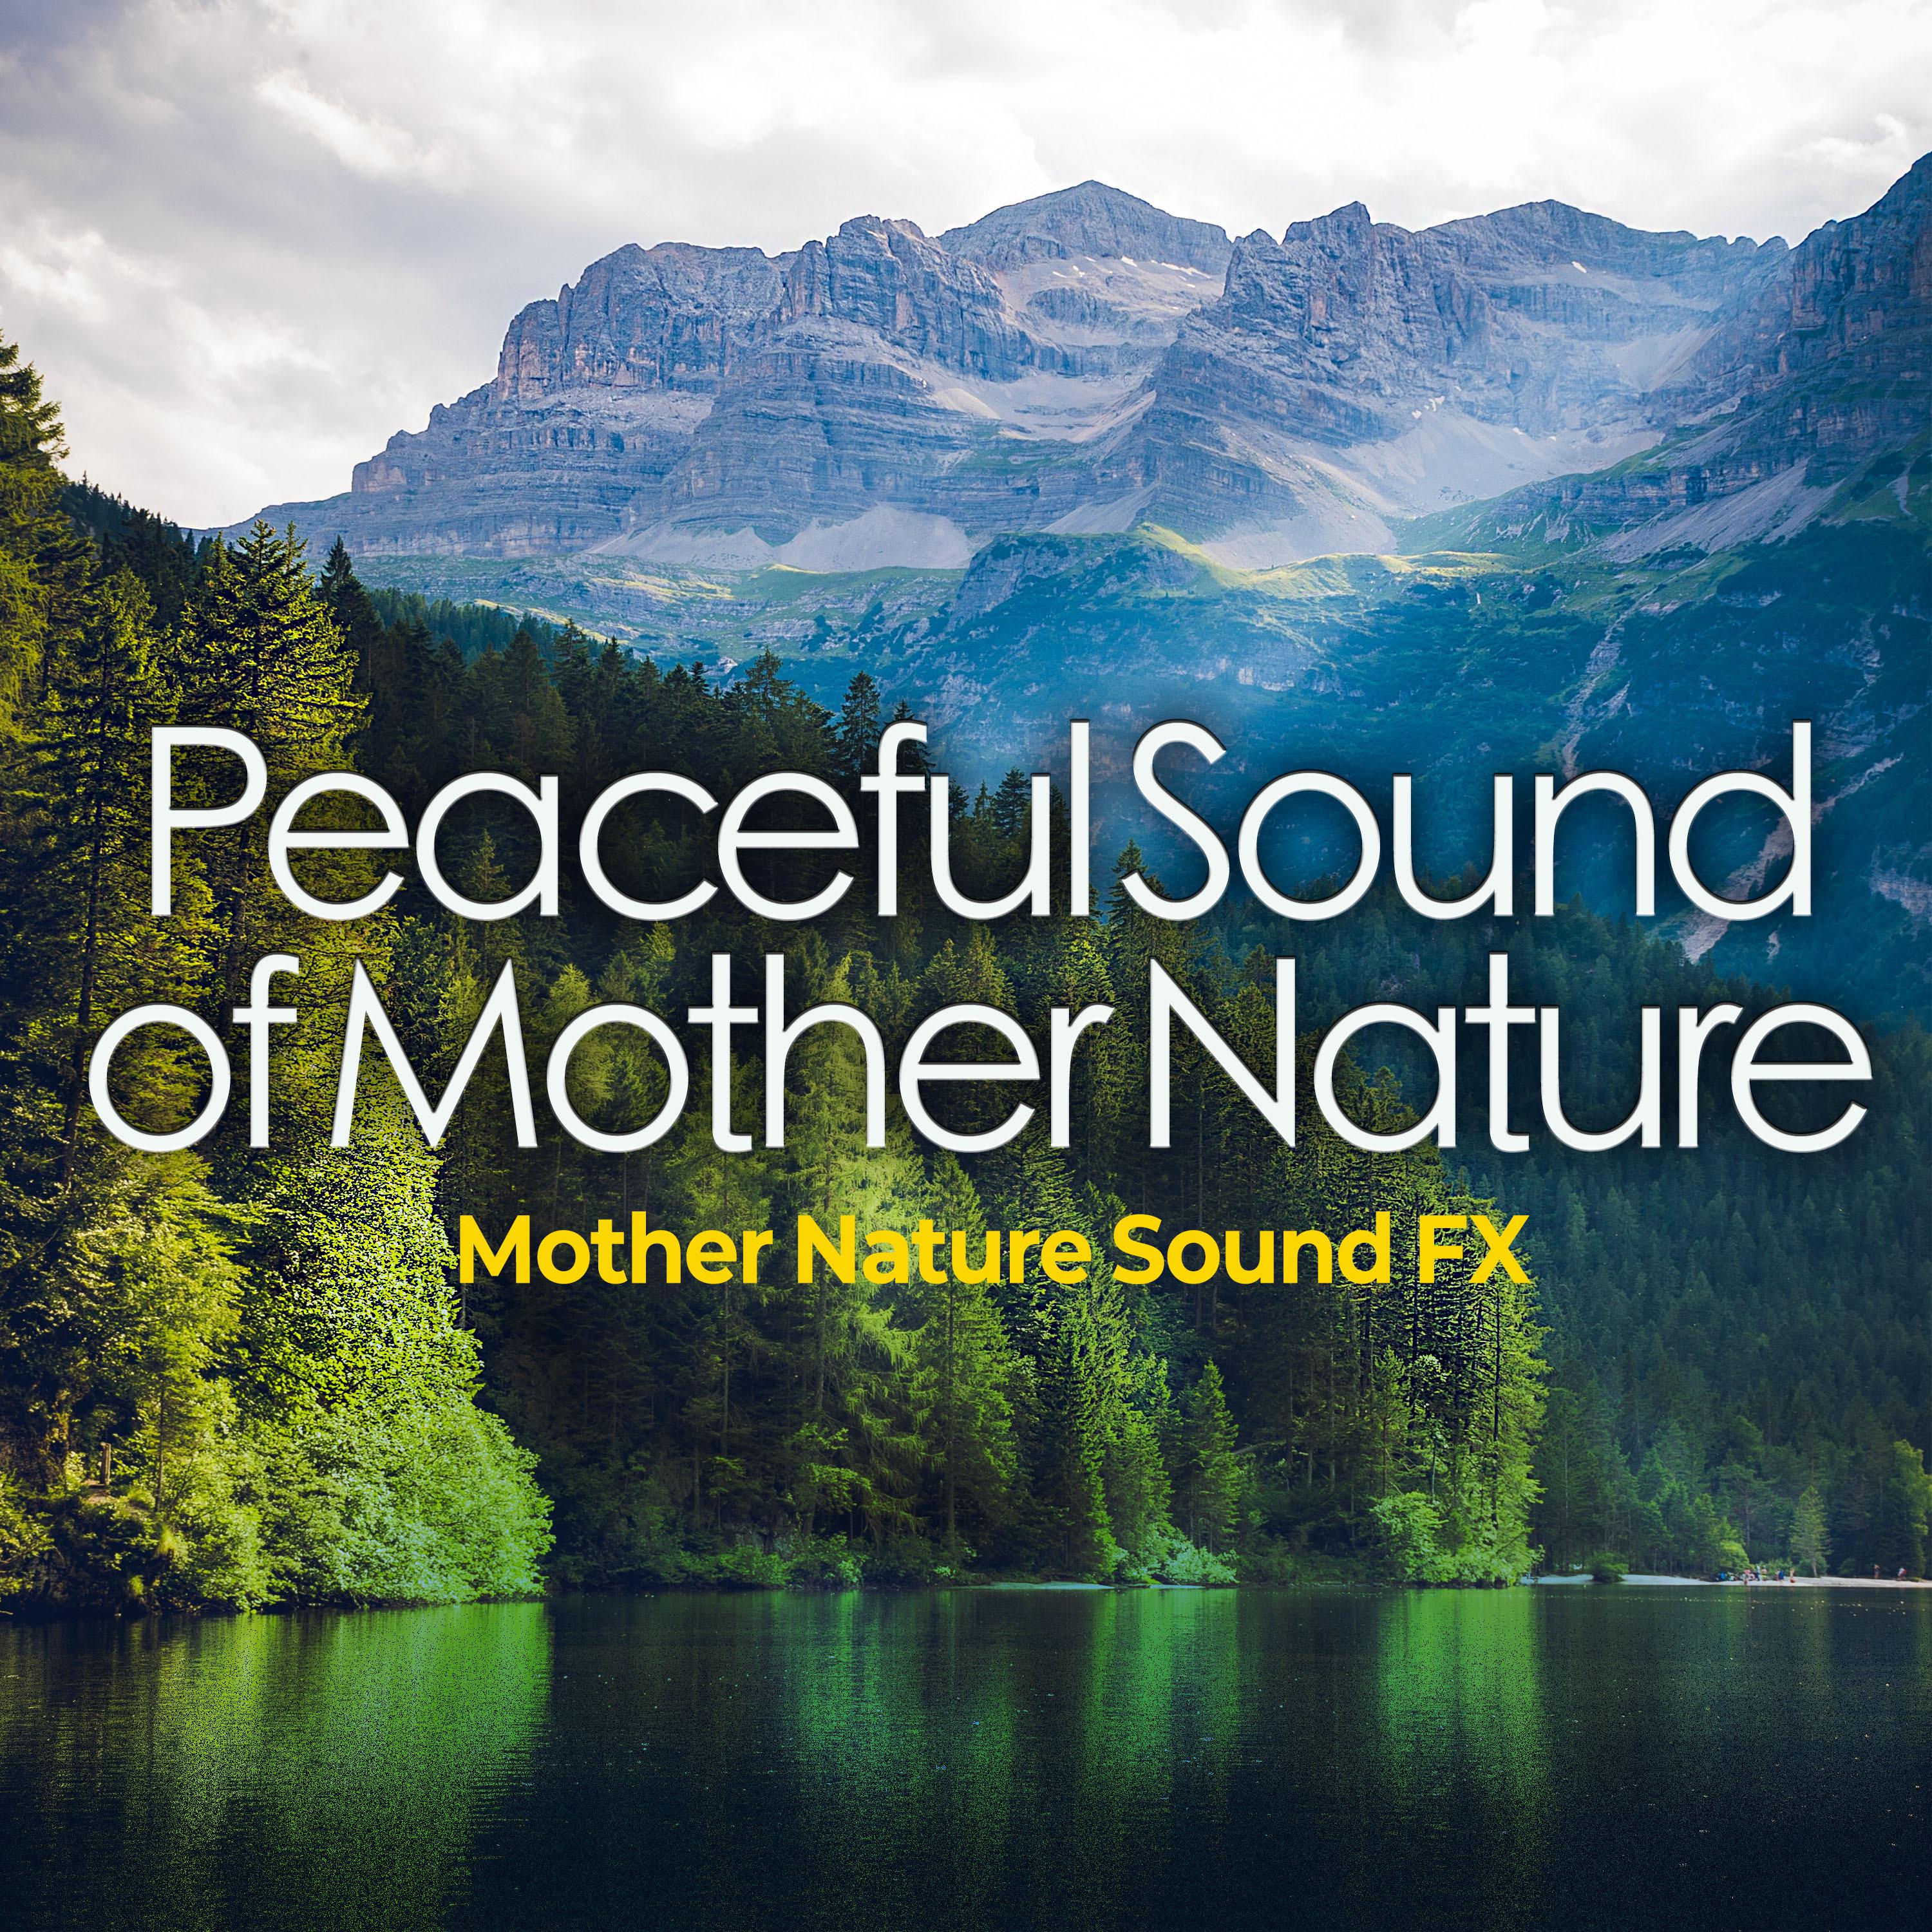 Peaceful Sound of Mother Nature